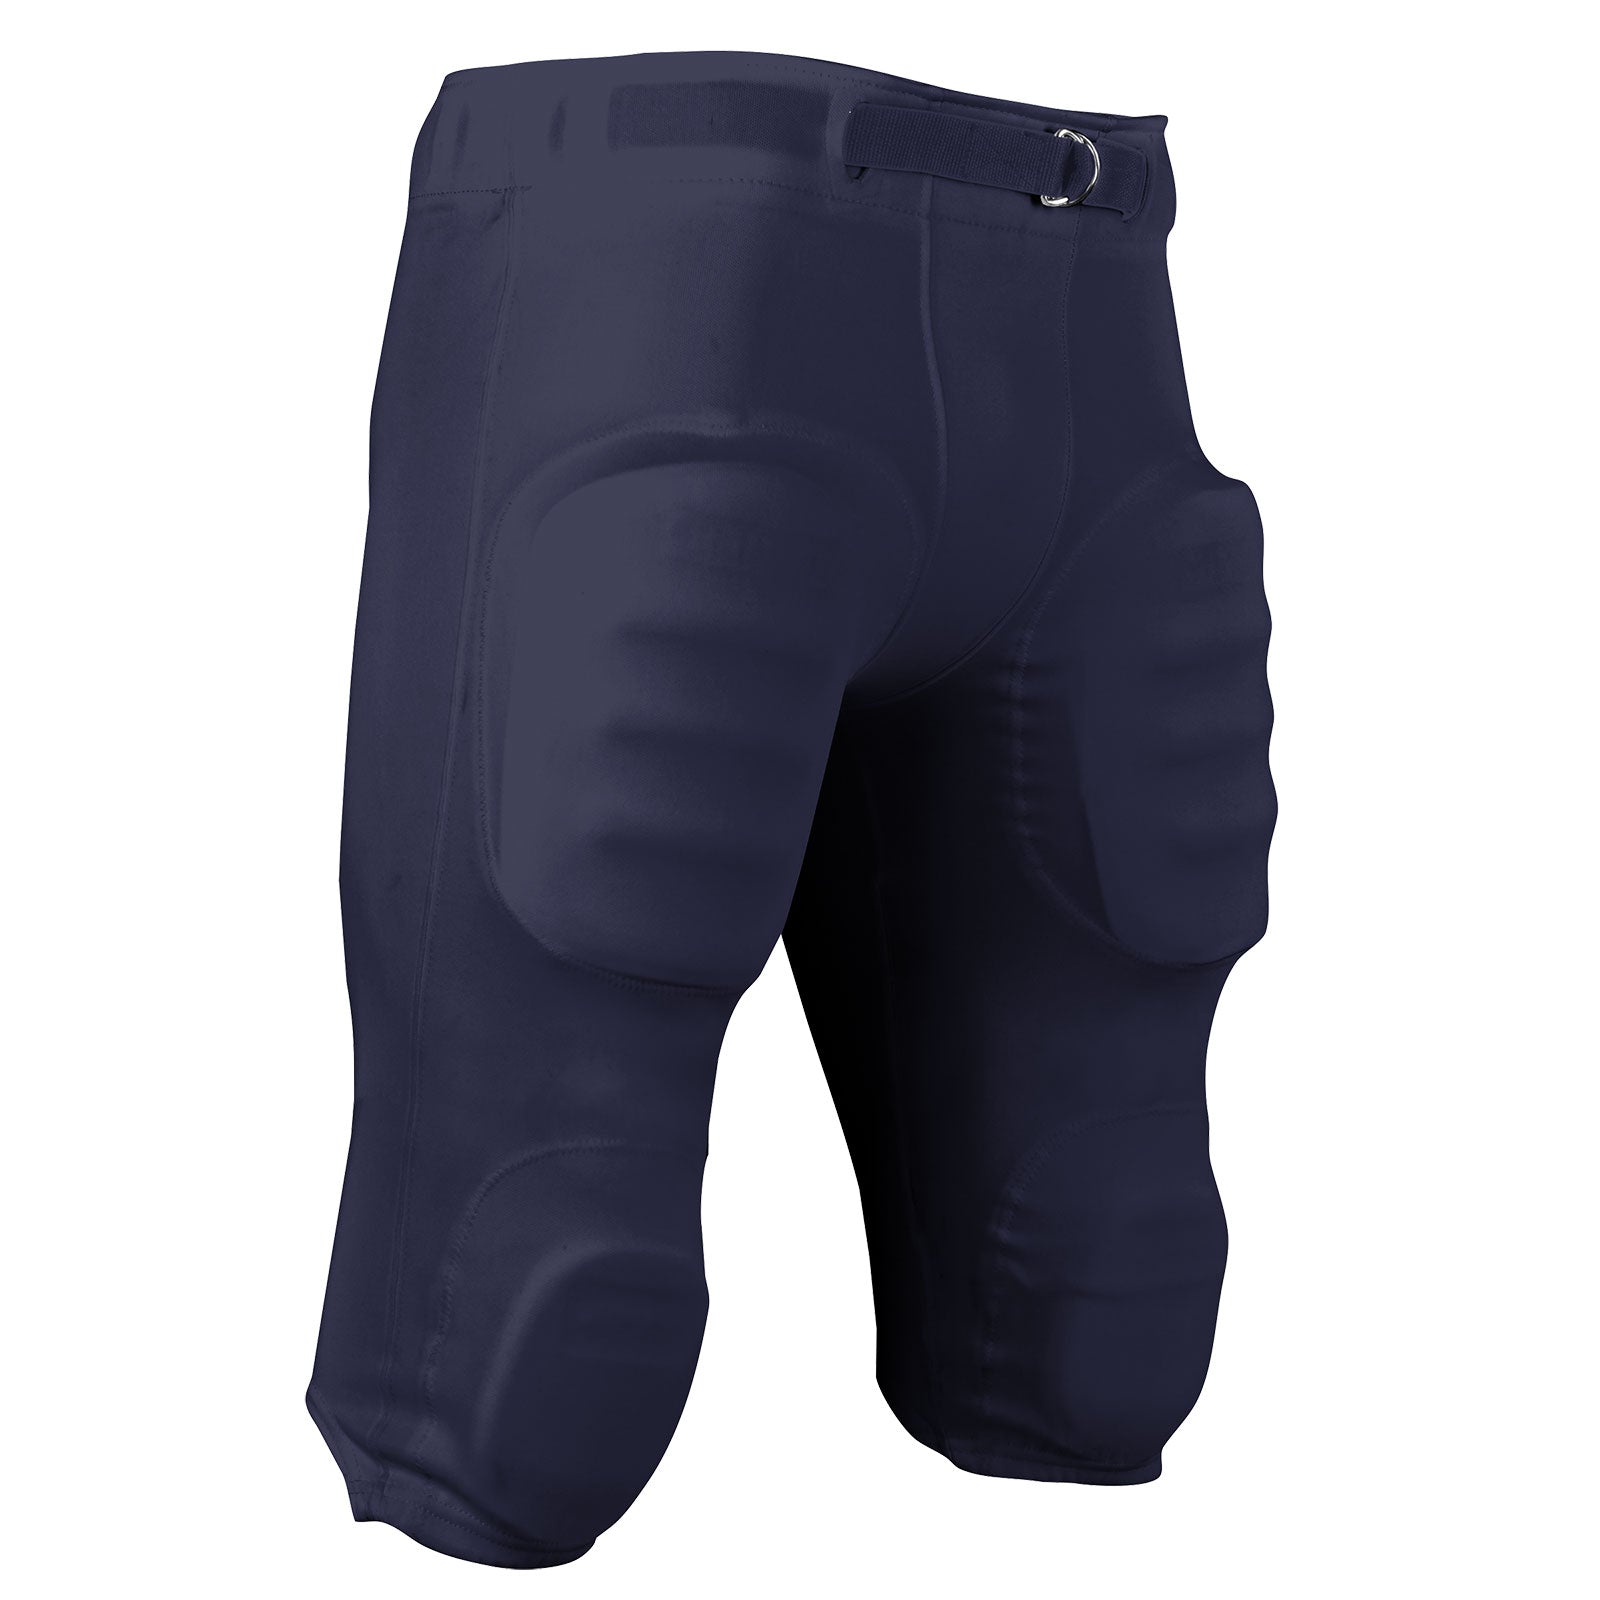 Double Knit Football Practice Pant With Pad Pockets NAVY BODY